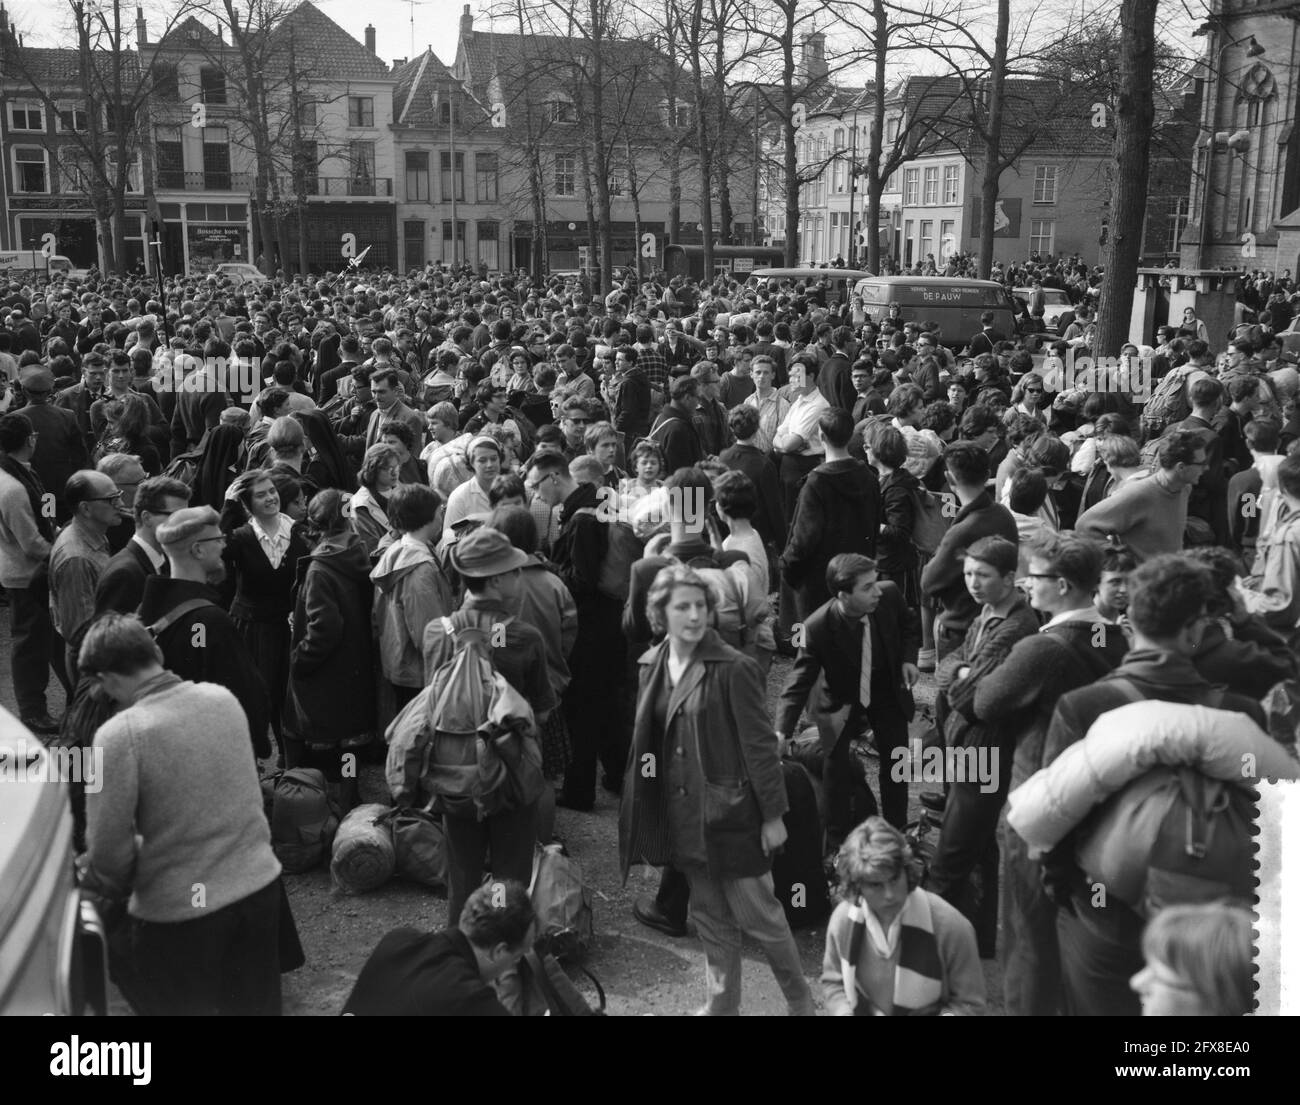 Beginning of the foot march Pax Christi at Den Bosch . Gathering place on the parade of the 2500 participants, April 6, 1961, Foot marches, participants, parades, gathering places, The Netherlands, 20th century press agency photo, news to remember, documentary, historic photography 1945-1990, visual stories, human history of the Twentieth Century, capturing moments in time Stock Photo